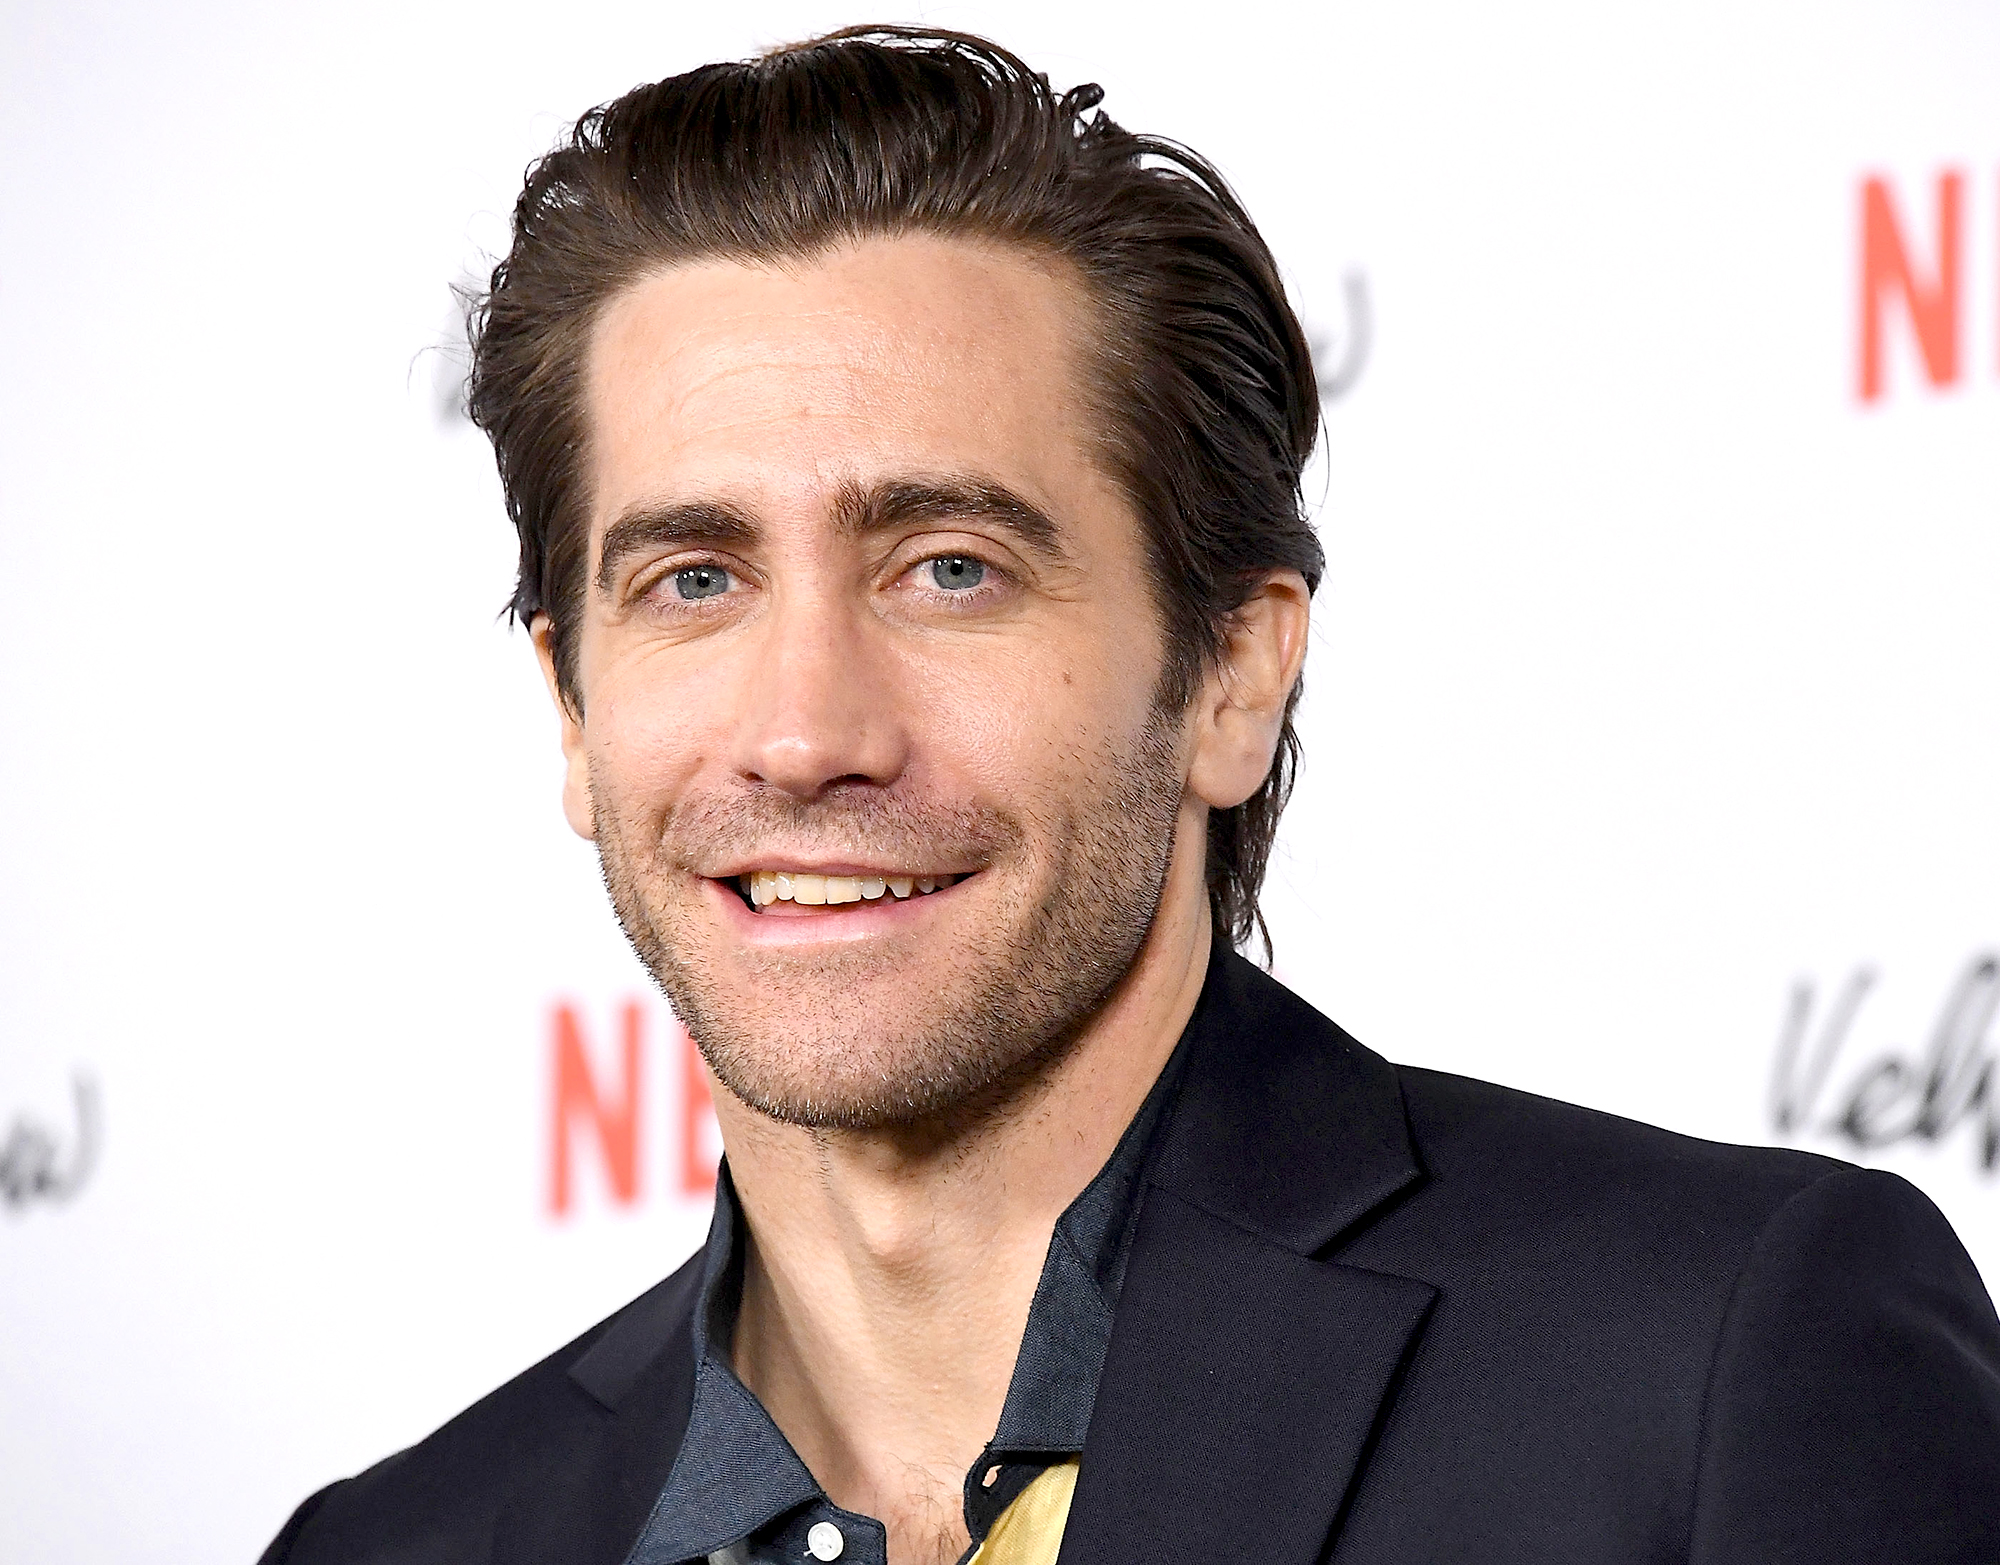 Jake Gyllenhaal Hairstyles, Hair Cuts and Colors